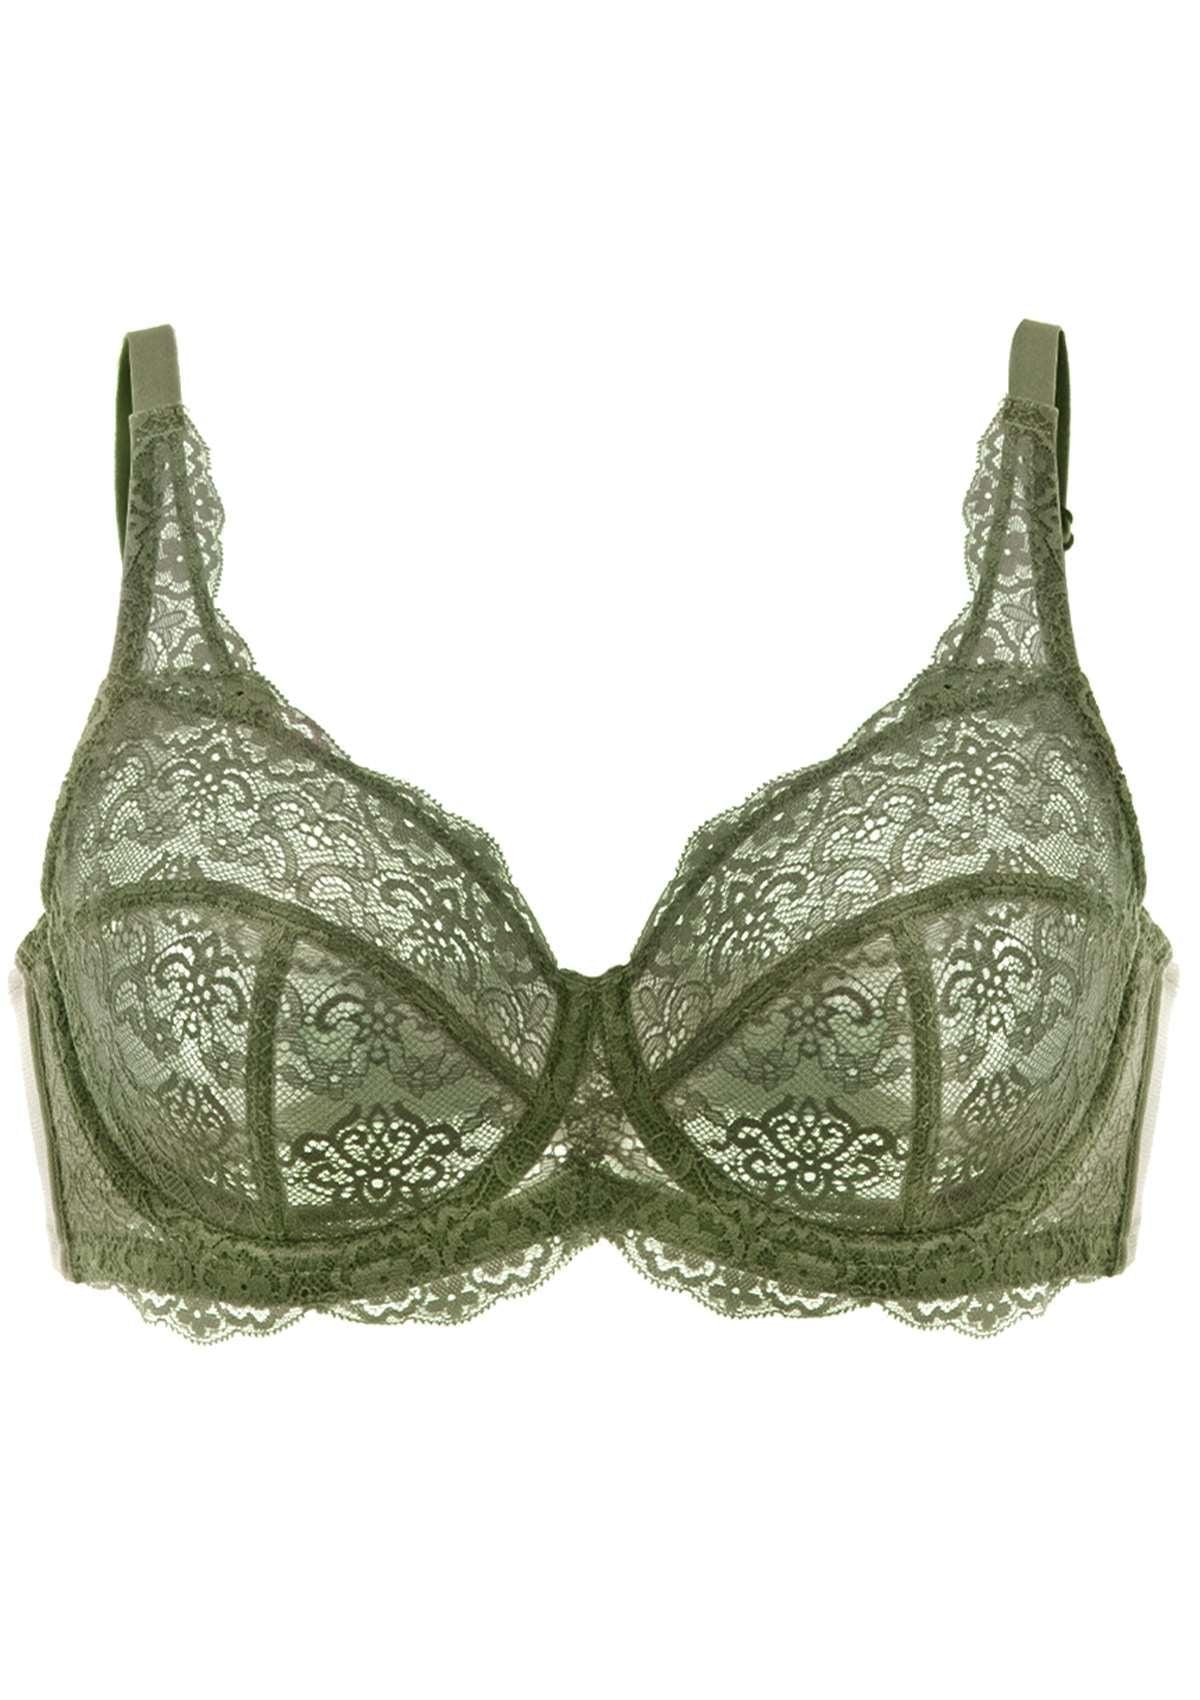 HSIA All-Over Floral Lace Unlined Bra: Minimizer Bra For Heavy Breasts - Dark Green / 34 / DDD/F